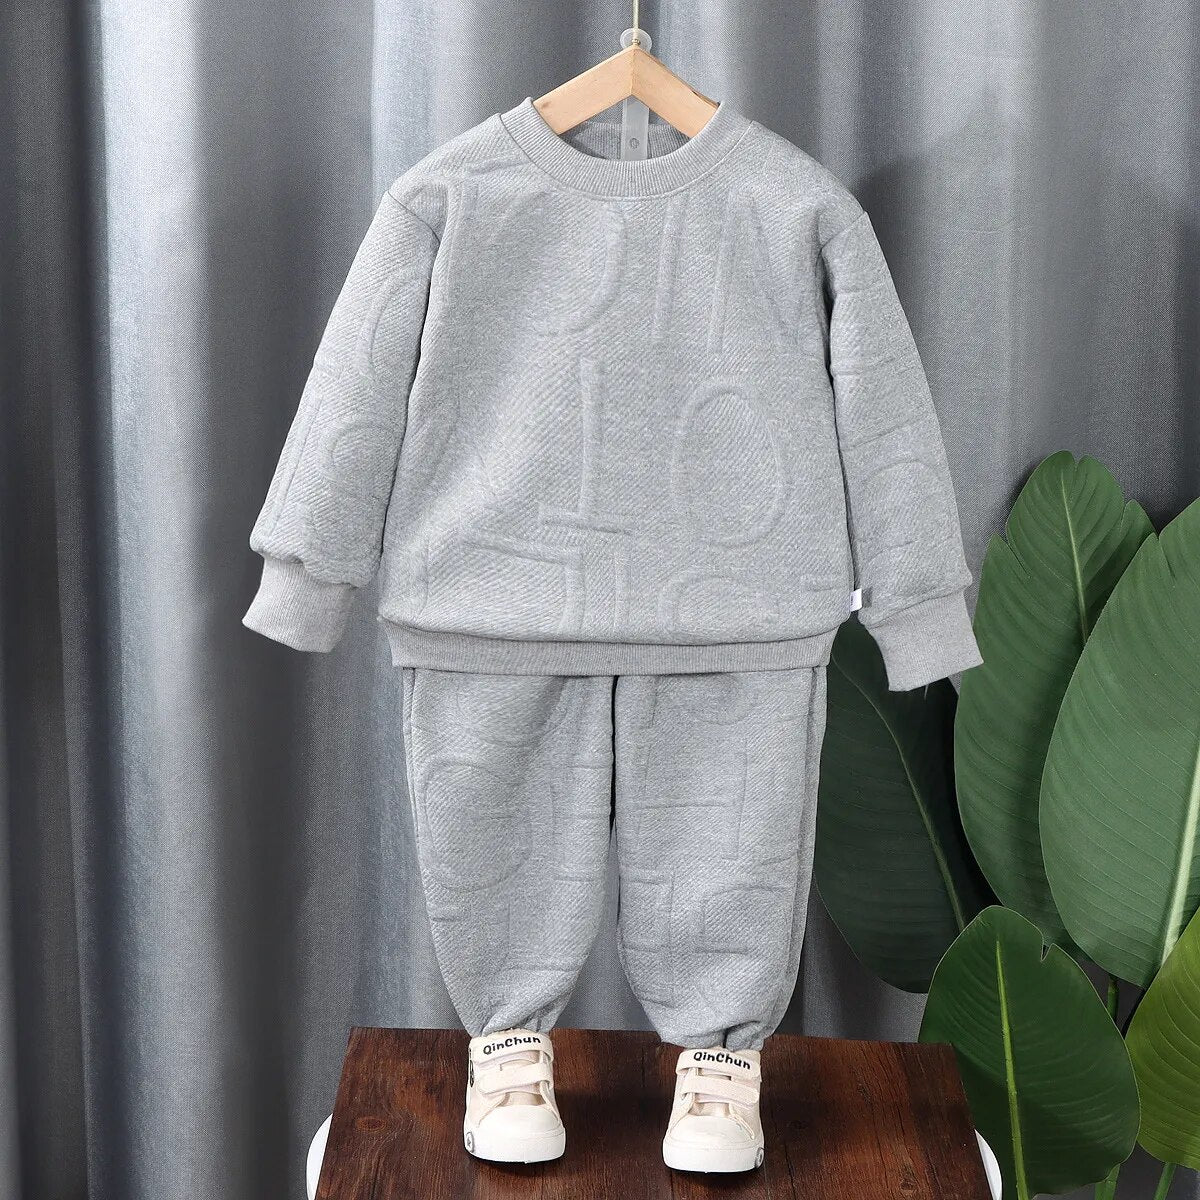 Boys 2Pcs Tracksuit Baby Girls Kids Casual Clothing Sets Baby Kids Sports Unisex Letter Pants Outfits 1-7 Ys Children Sweatshirt